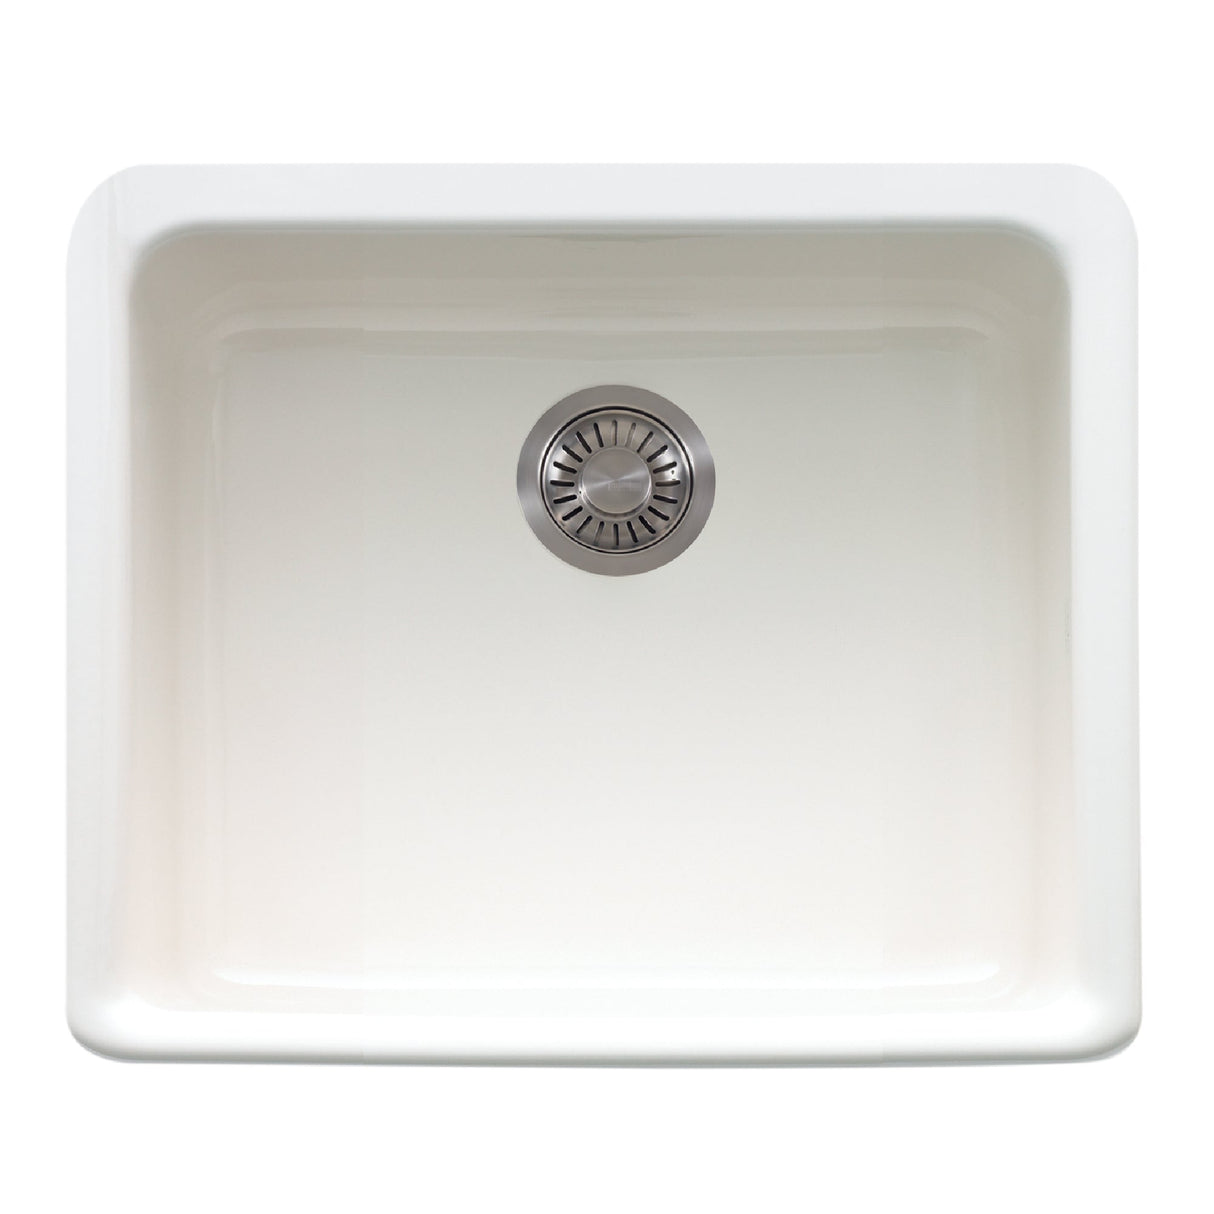 FRANKE MHK110-20WH Manor House 19.5-in. x 16.0-in. White Apron Front Single Bowl Fireclay Kitchen Sink - MHK110-20WH In White